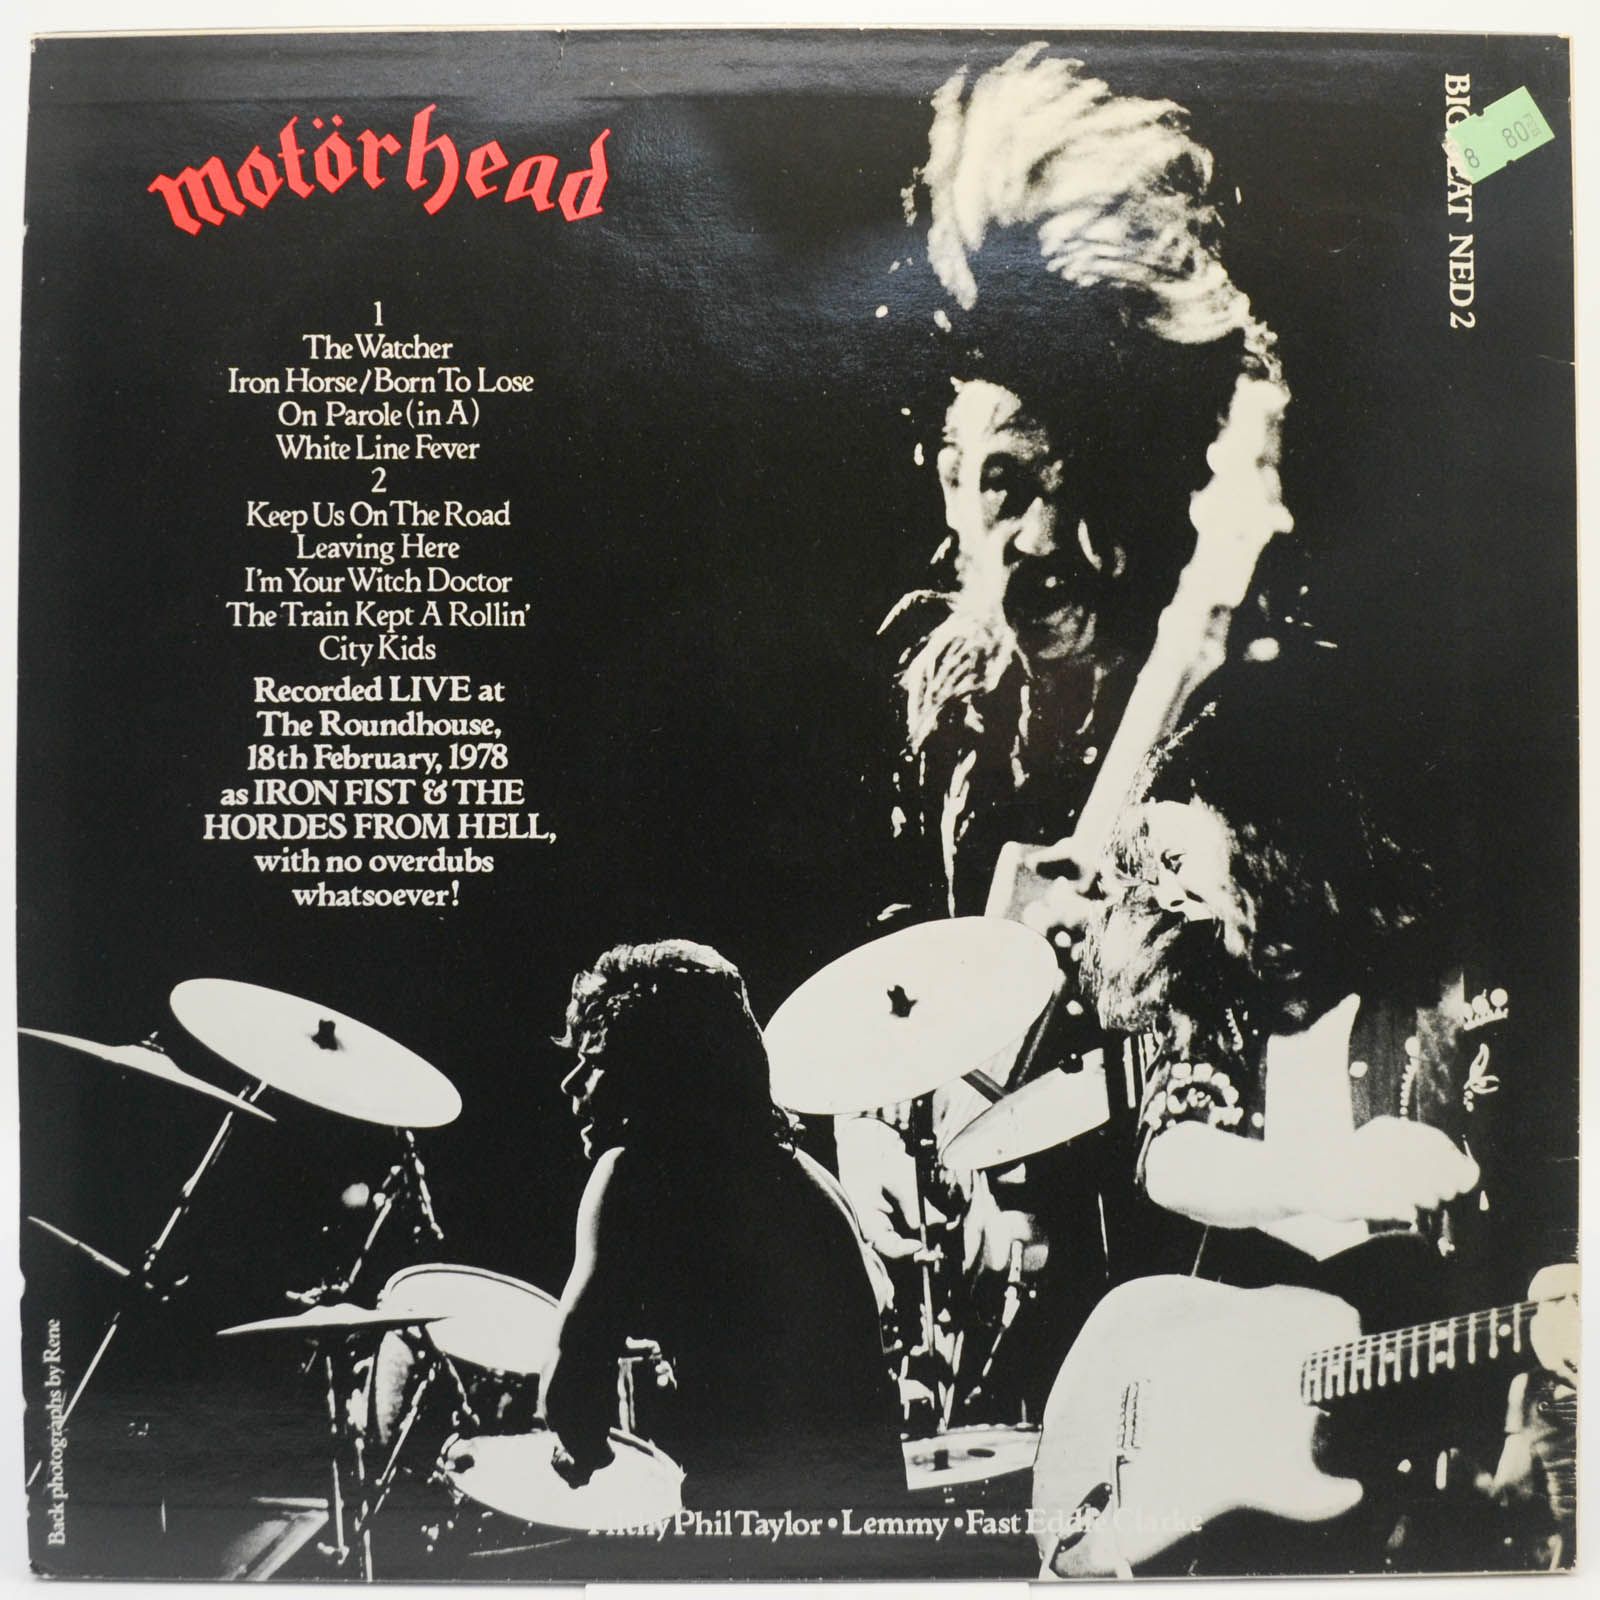 Motörhead — What's Words Worth? (Recorded Live 1978) (UK), 1983